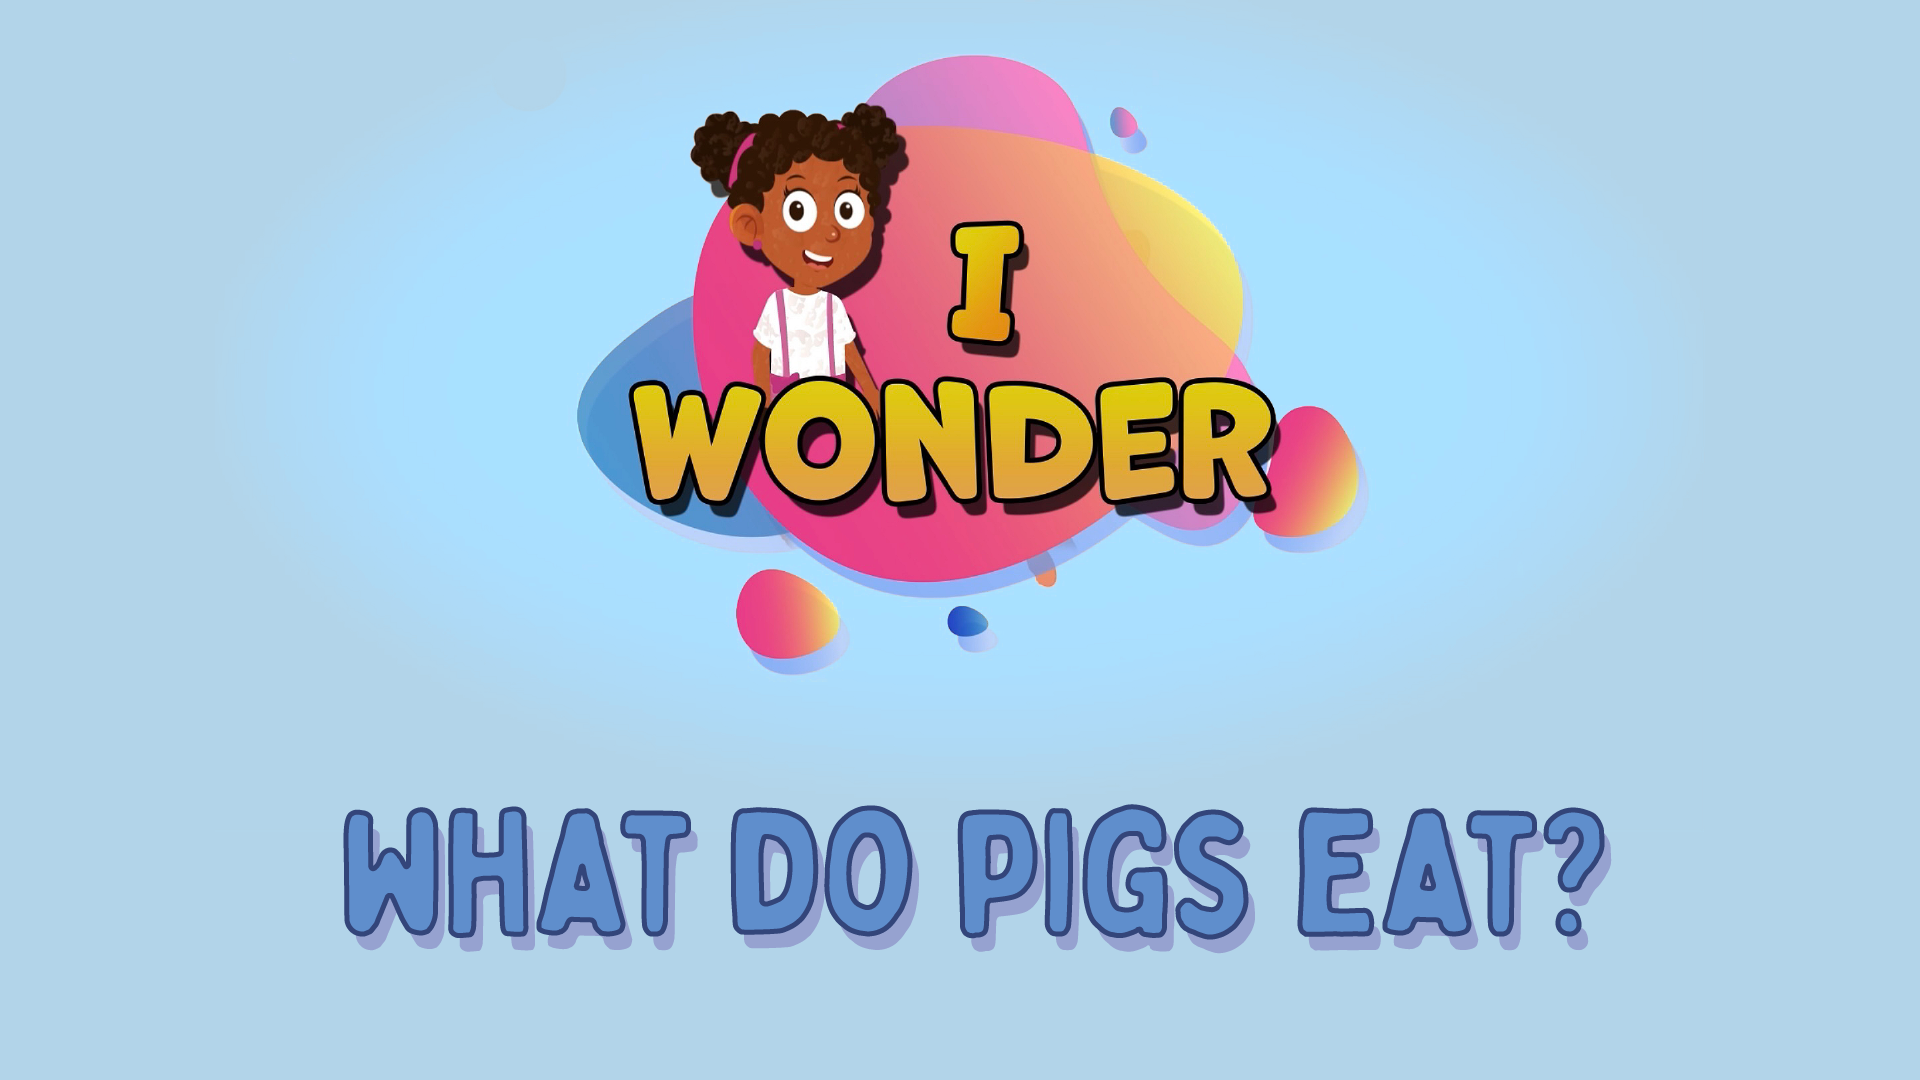 What Do Pigs Eat?